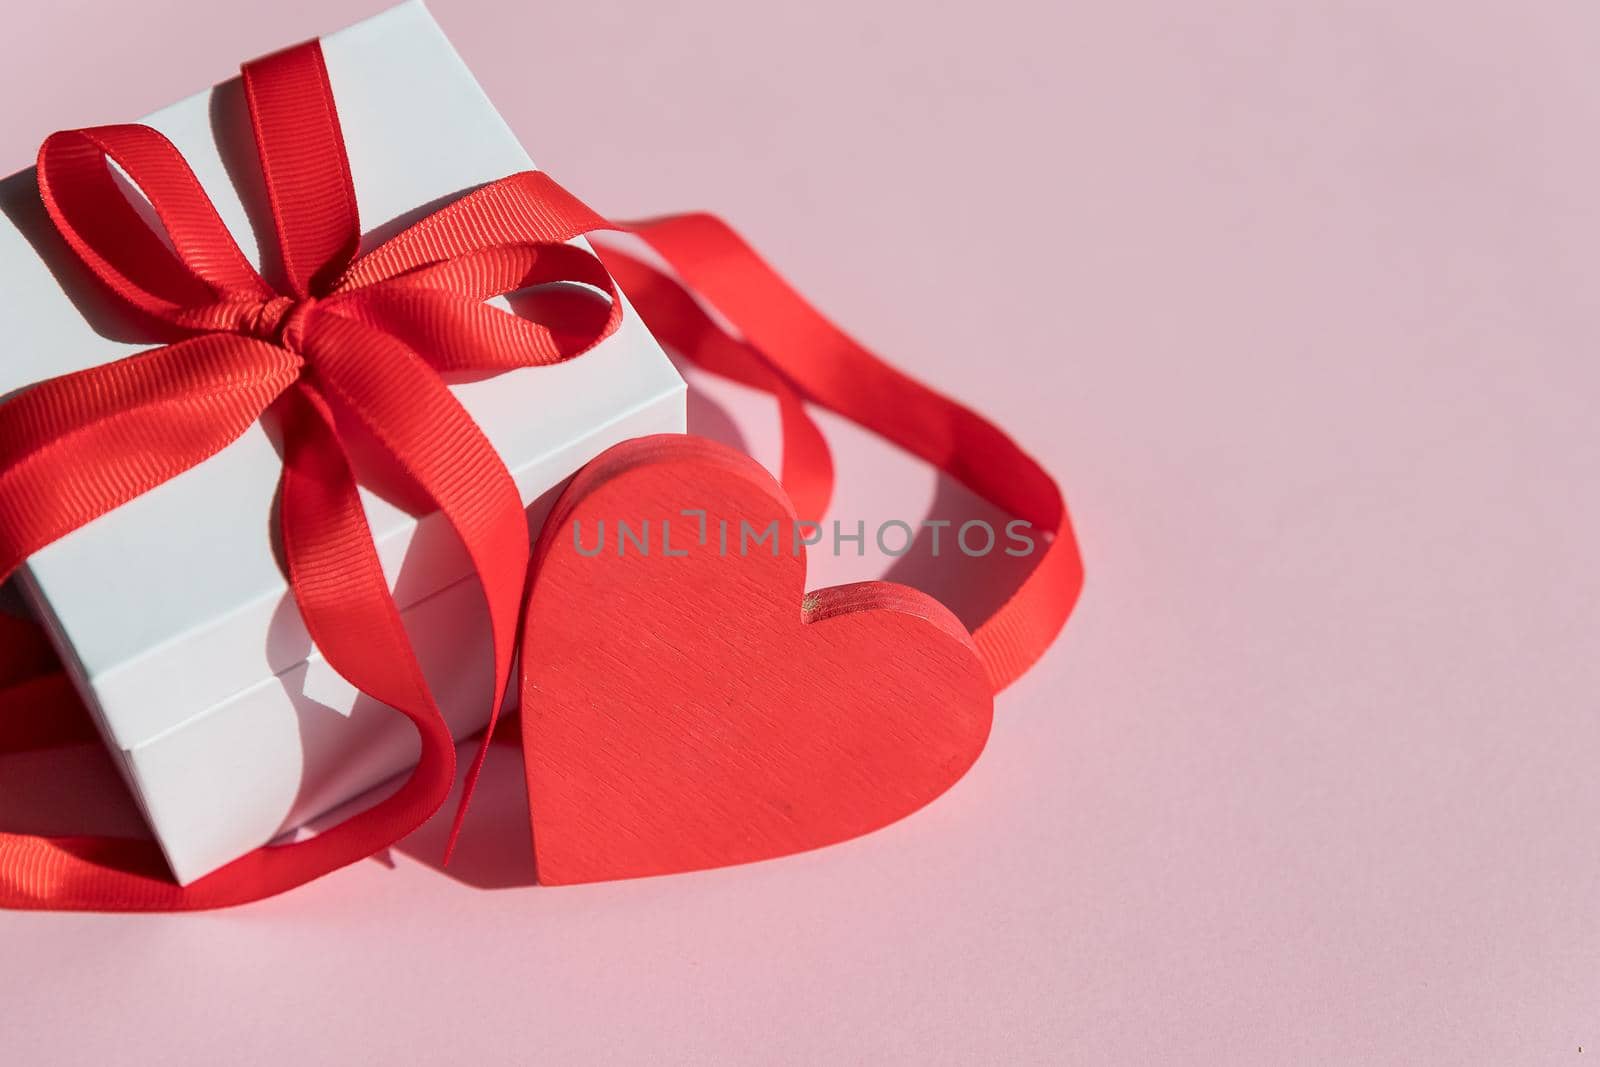 Gift box with red bow ribbon and empty paper note on wooden table for Valentines day